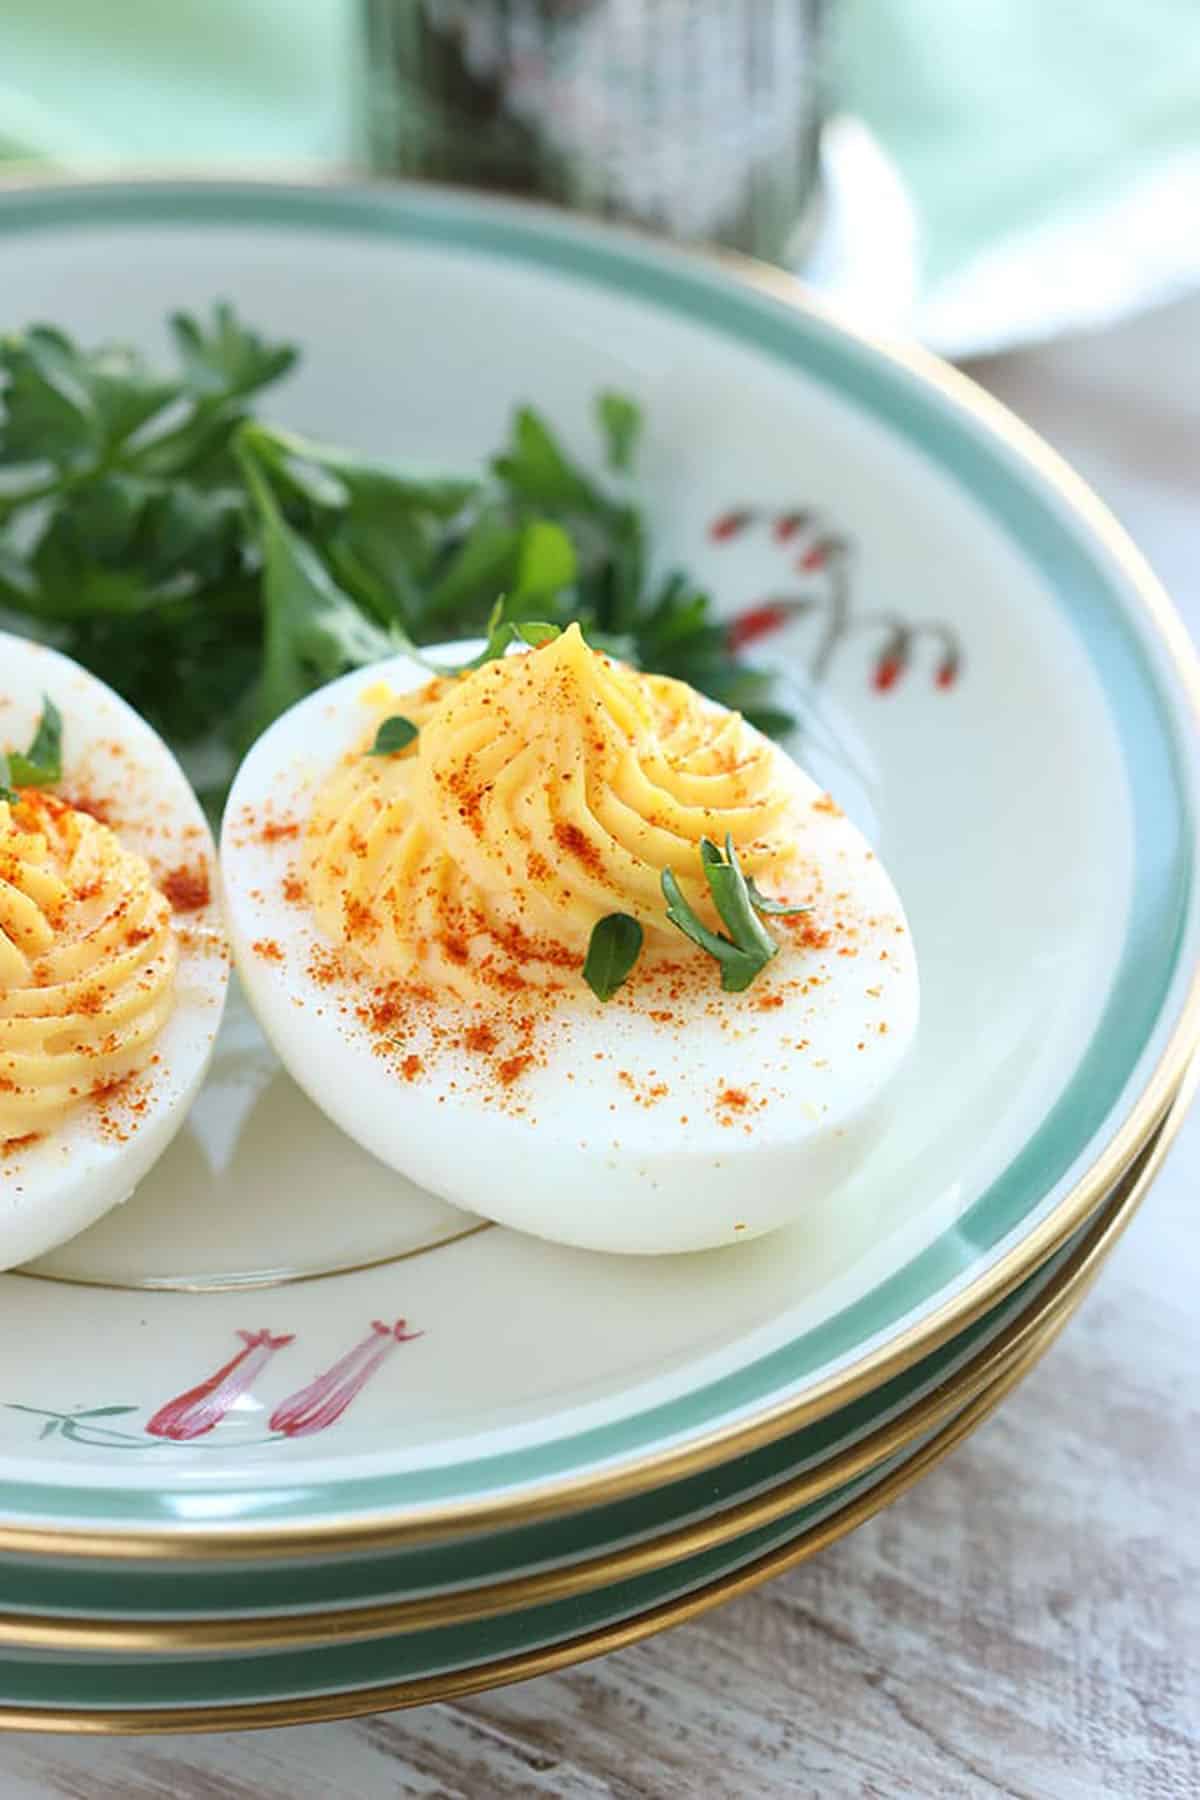 Deviled egg on a plate with paprika and parsley sprinkled on top.